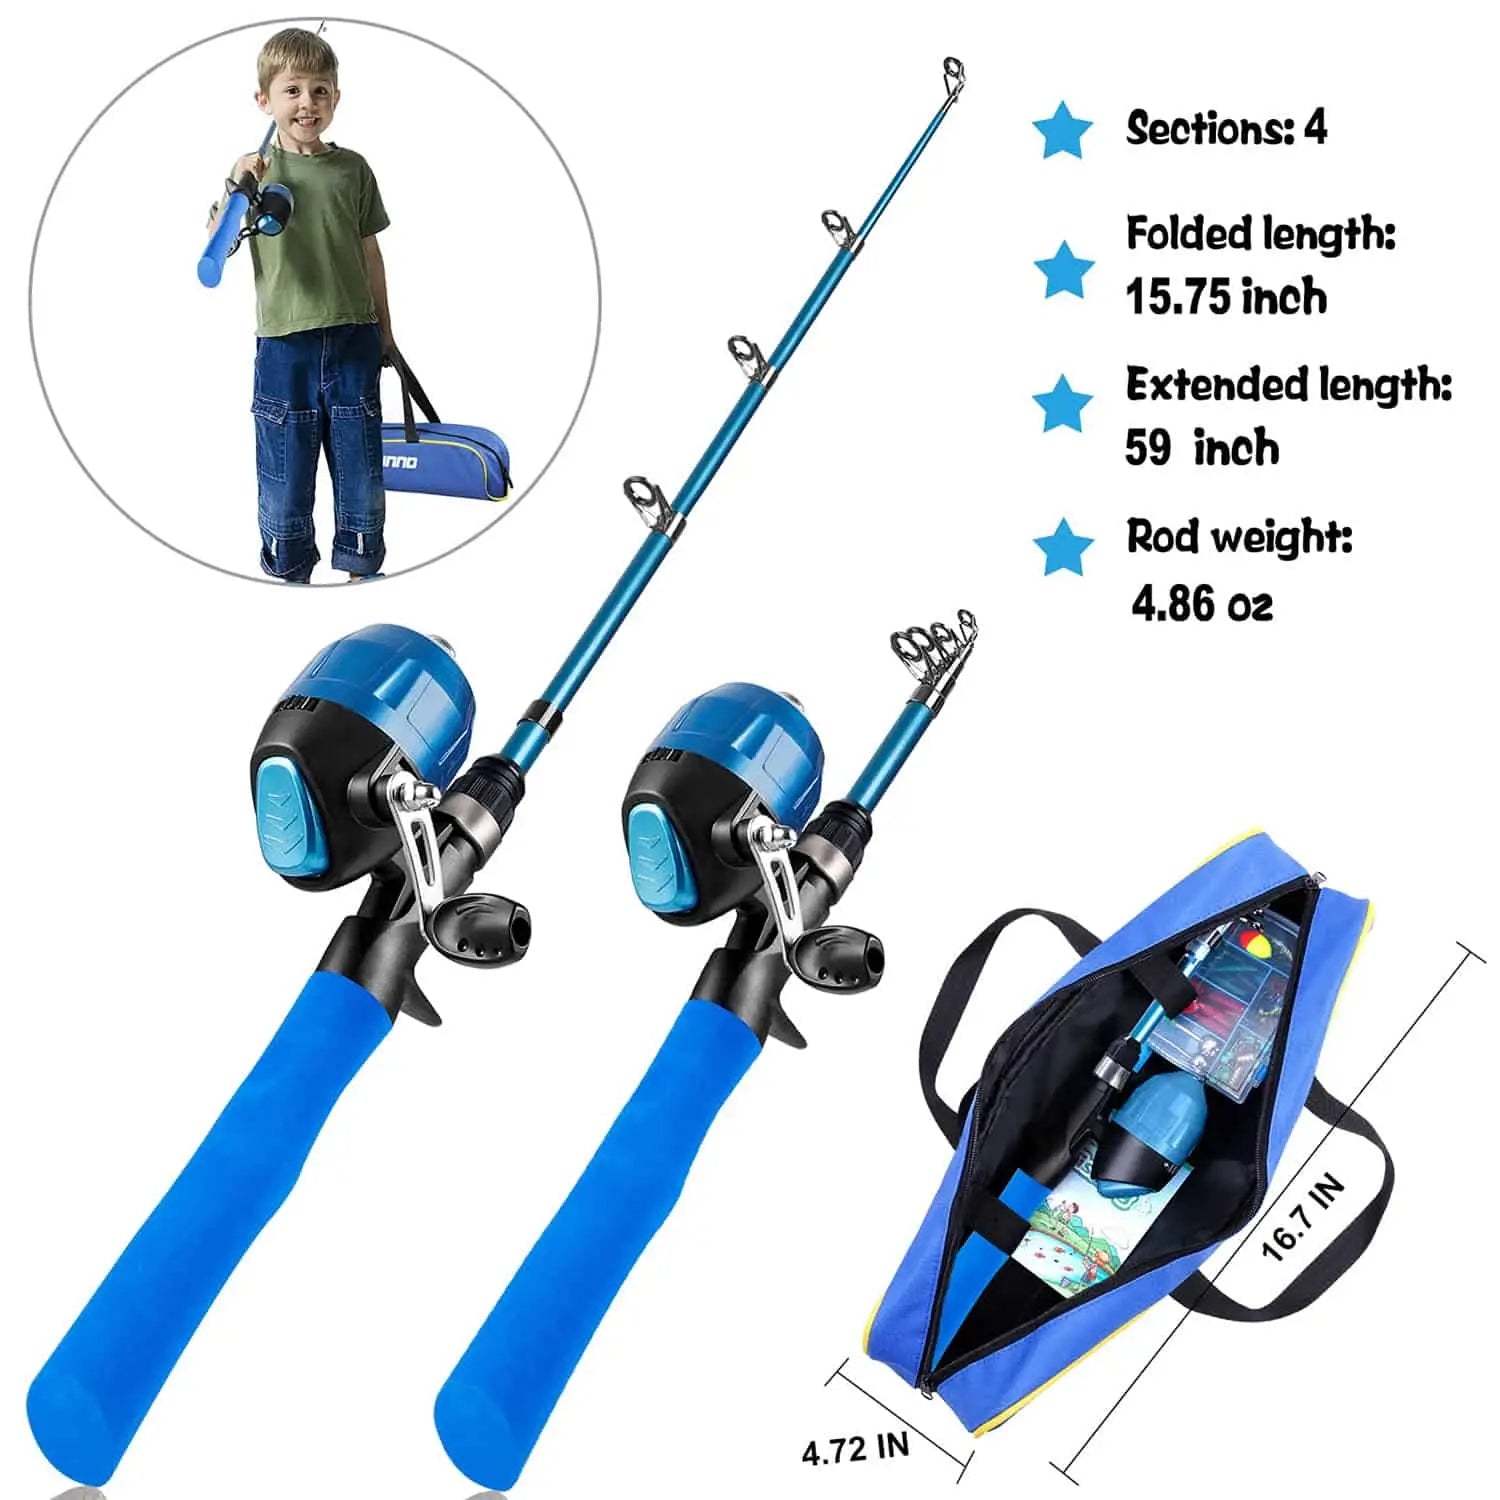 Dynwaveca Child Fishing Rod Complete Set With Lures Traveling Kid Fishing Pole Portable Telescopic Fishing Rod And Reel Combo Kits For Boys Girls Blue